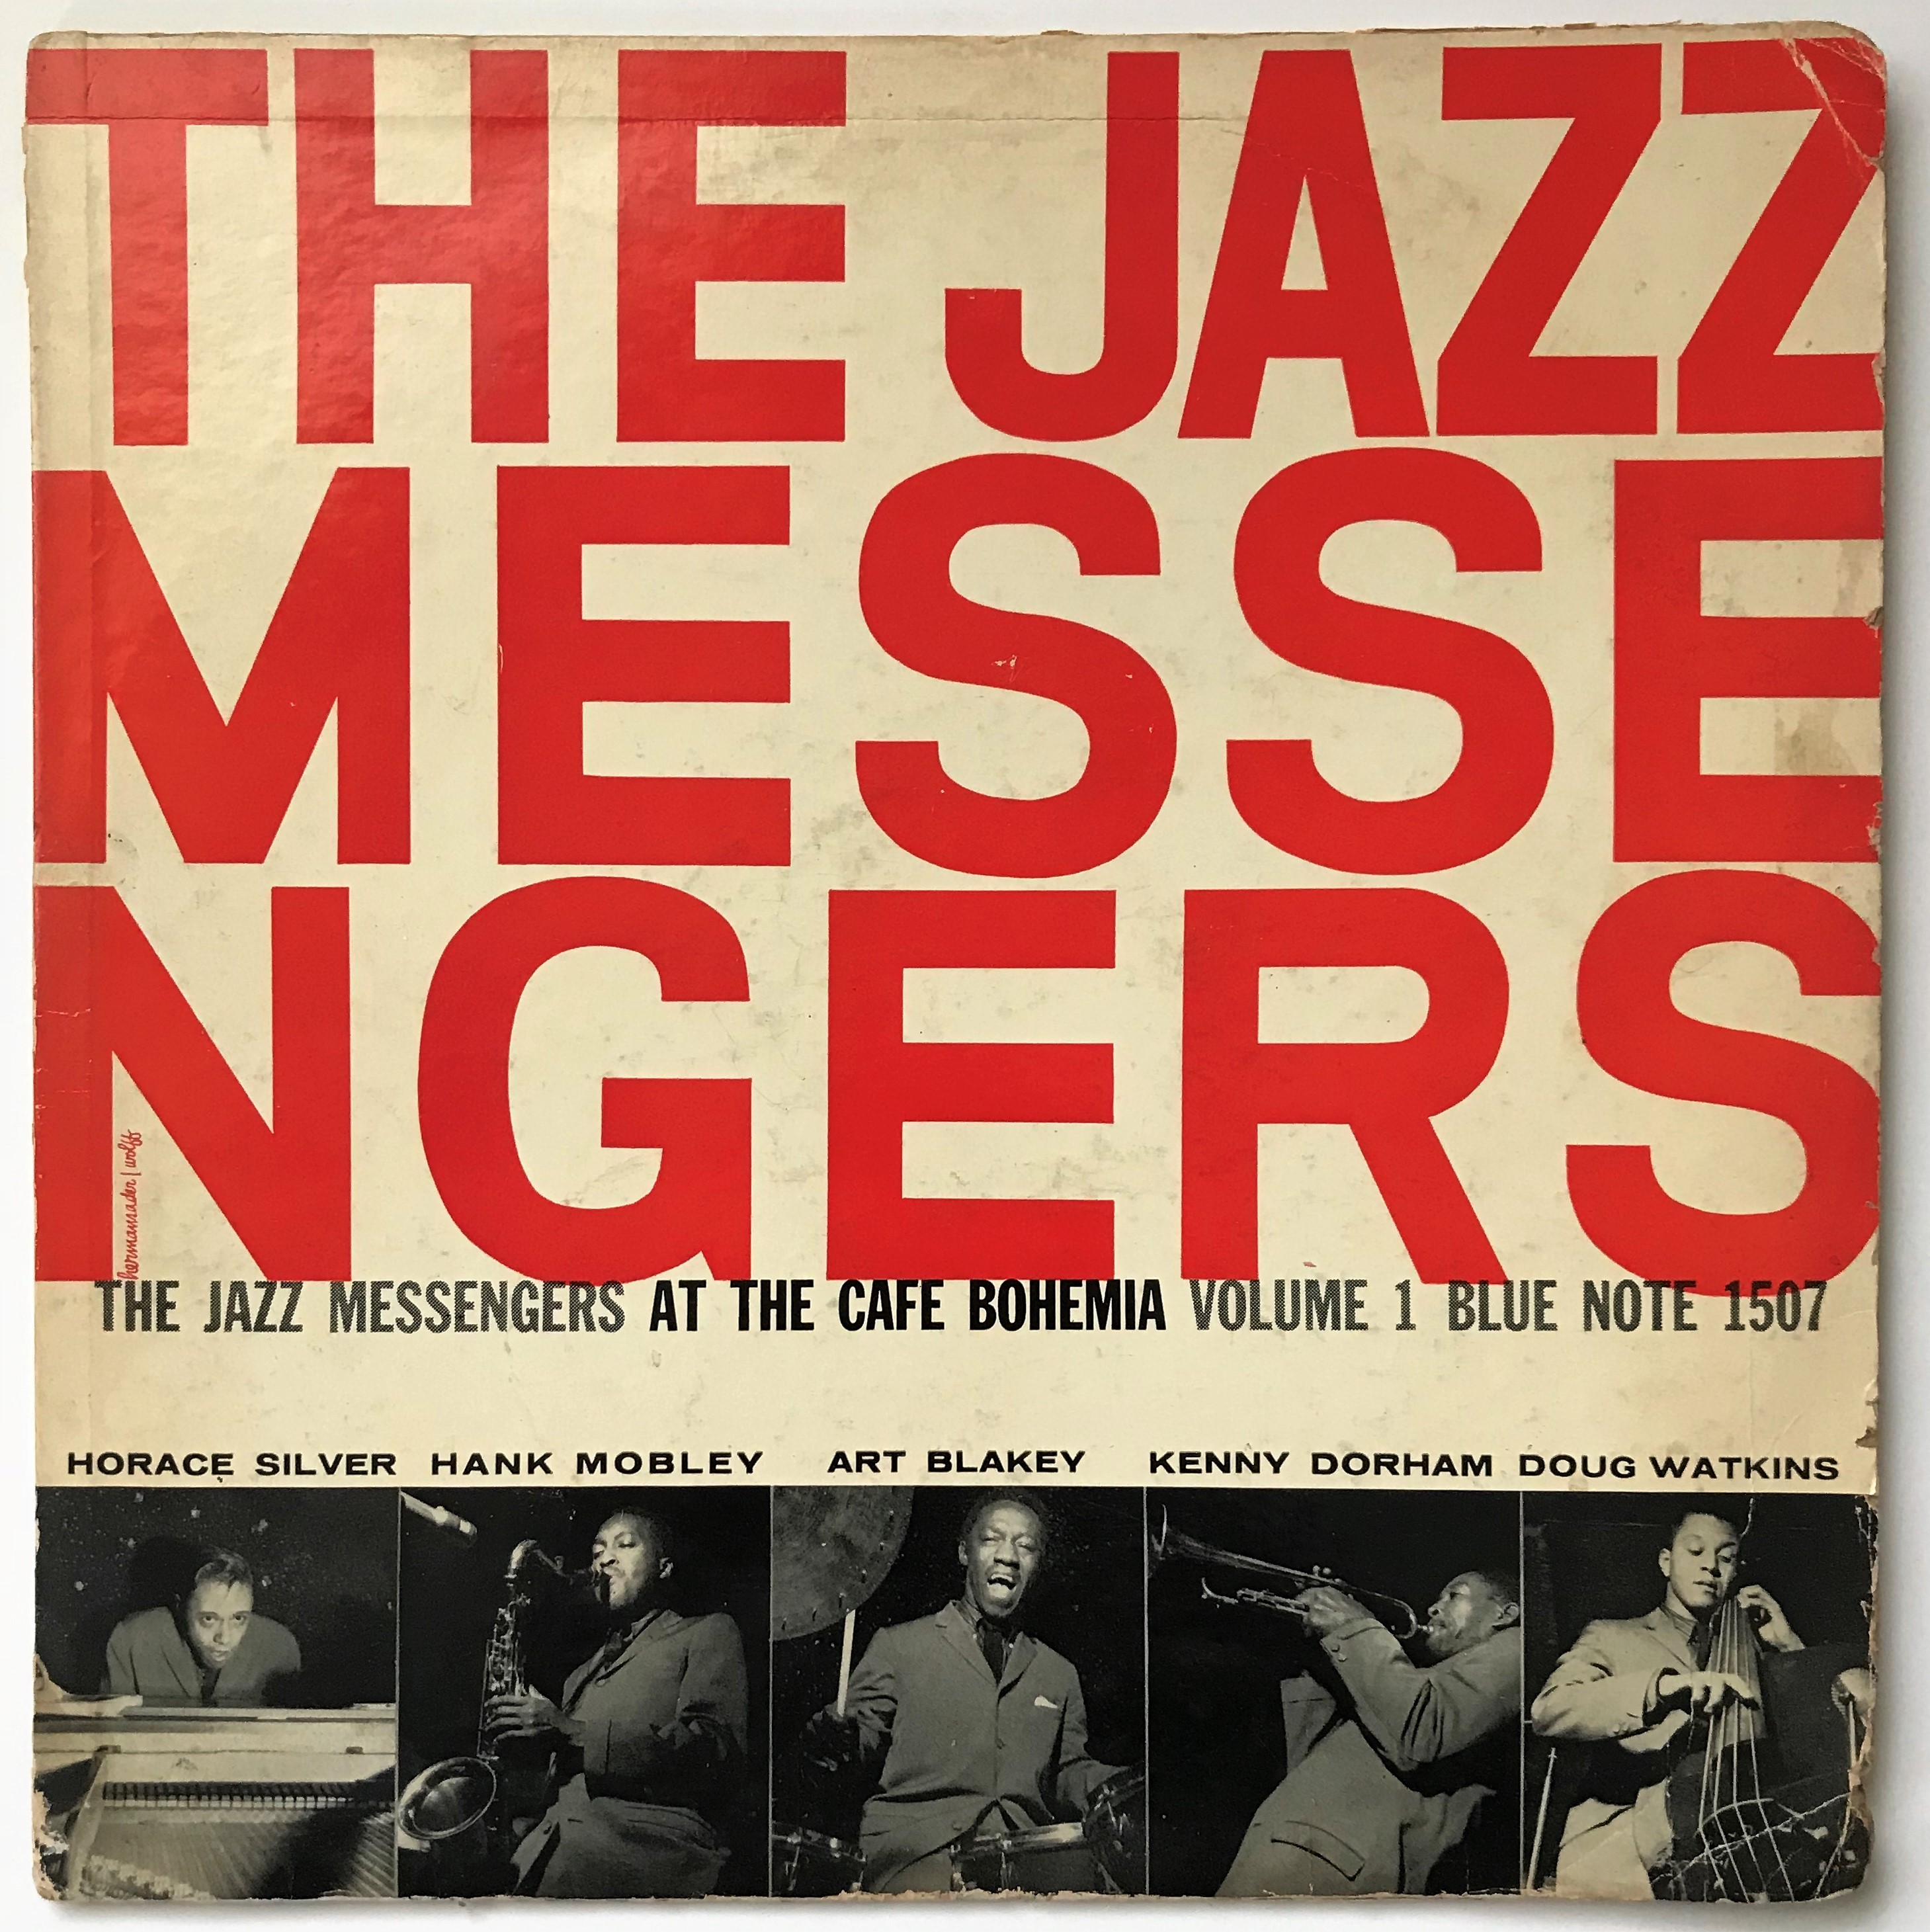 The Jazz Messengers At The Cafe Bohemia, Volume 1 (Blue Note 